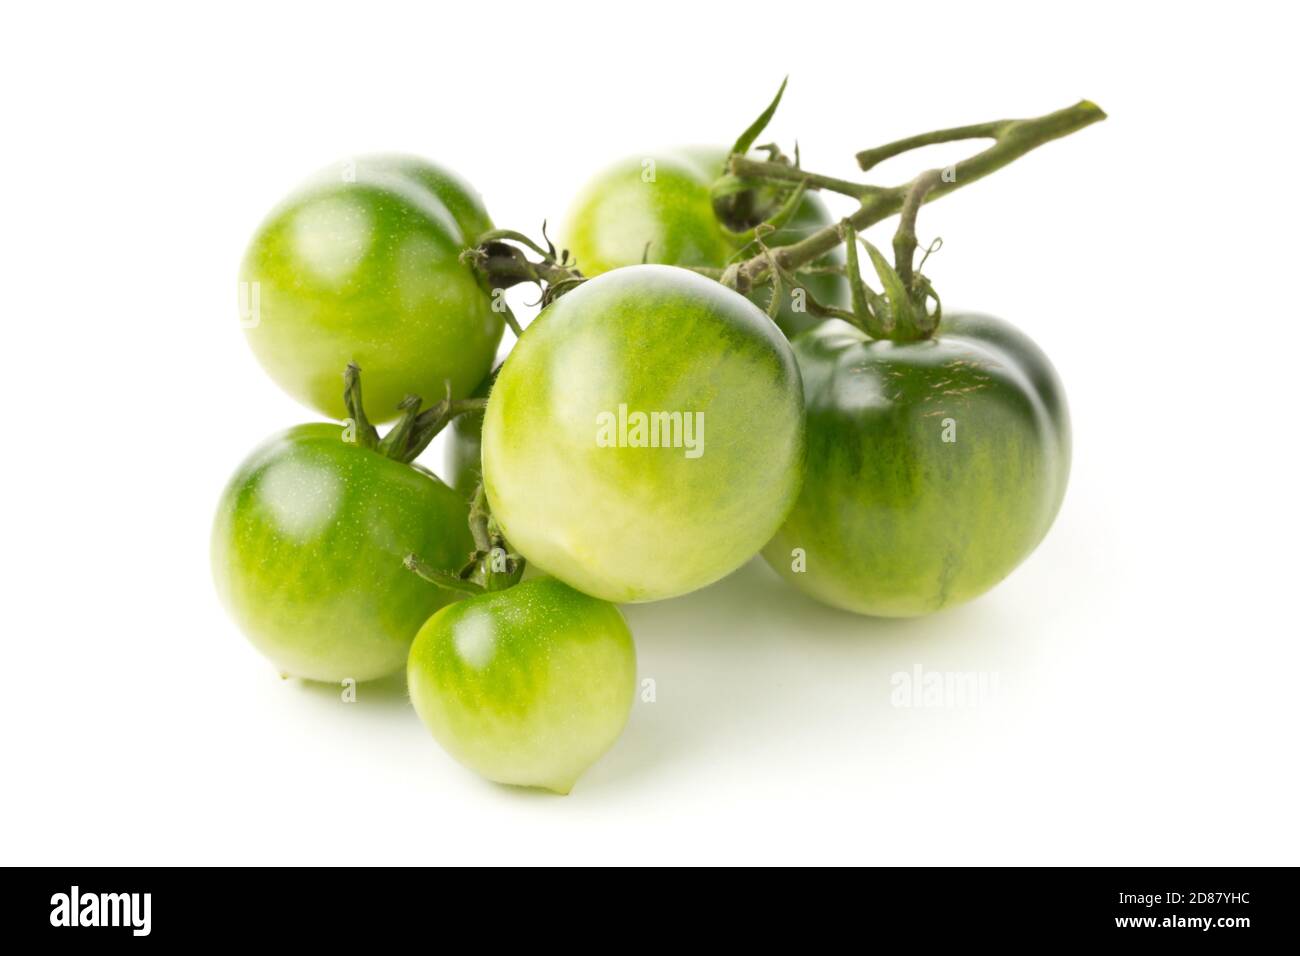 Bundle of unripe green tomatoes over white background, unripe tomatoes can be fried or used for relish, selective focus Stock Photo